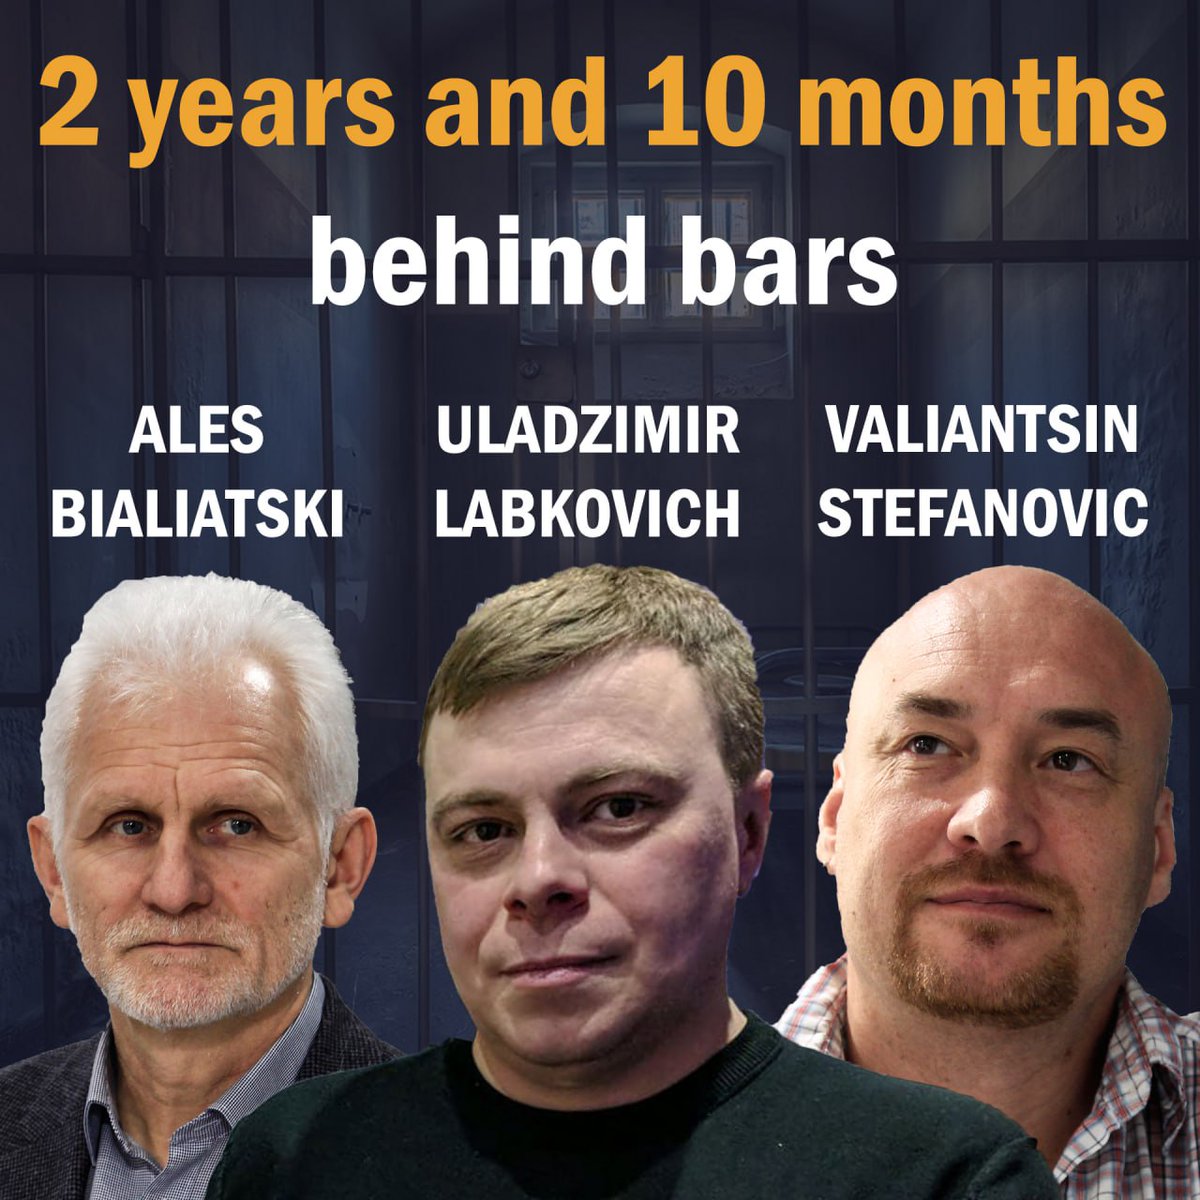 💔Human rights defenders Ales Bialiatski, Valiantsin Stefanovich and Uladzimir Labkovich have been in prison for 2 years and 10 months. 

On 14 July 2021, searches were carried out at their home and at the homes of other @viasna96 activists. Last year, #NobelPeacePrize laureate